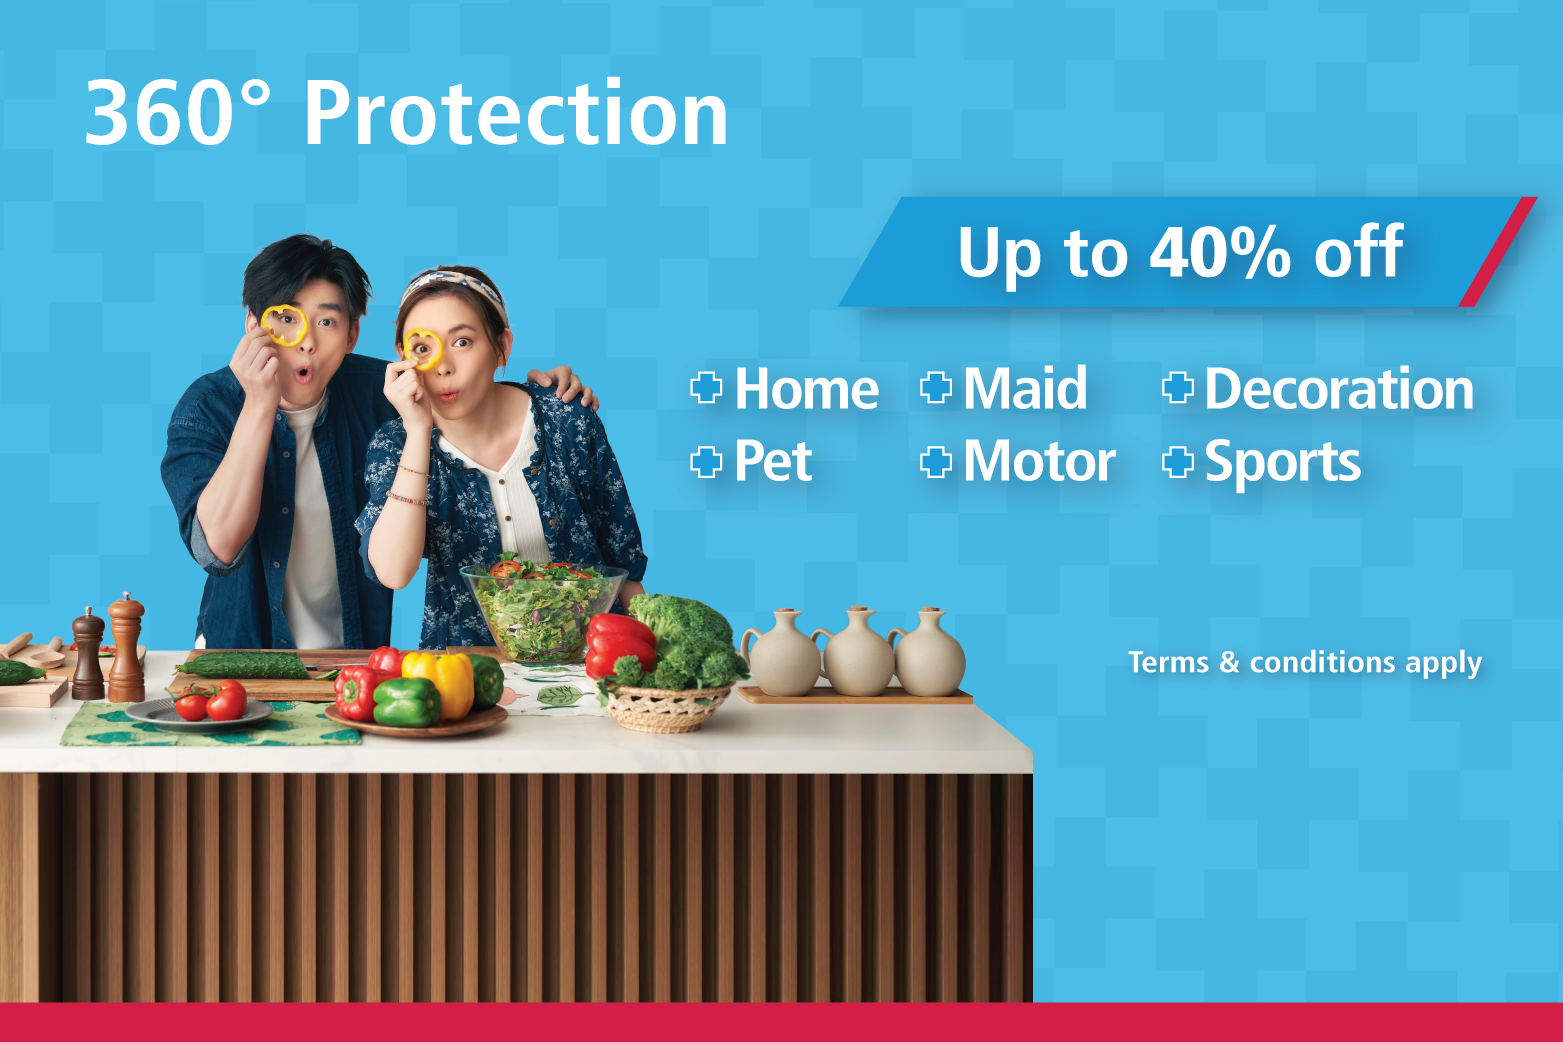 All-round Protection for everyday life<br>Up to 40% off